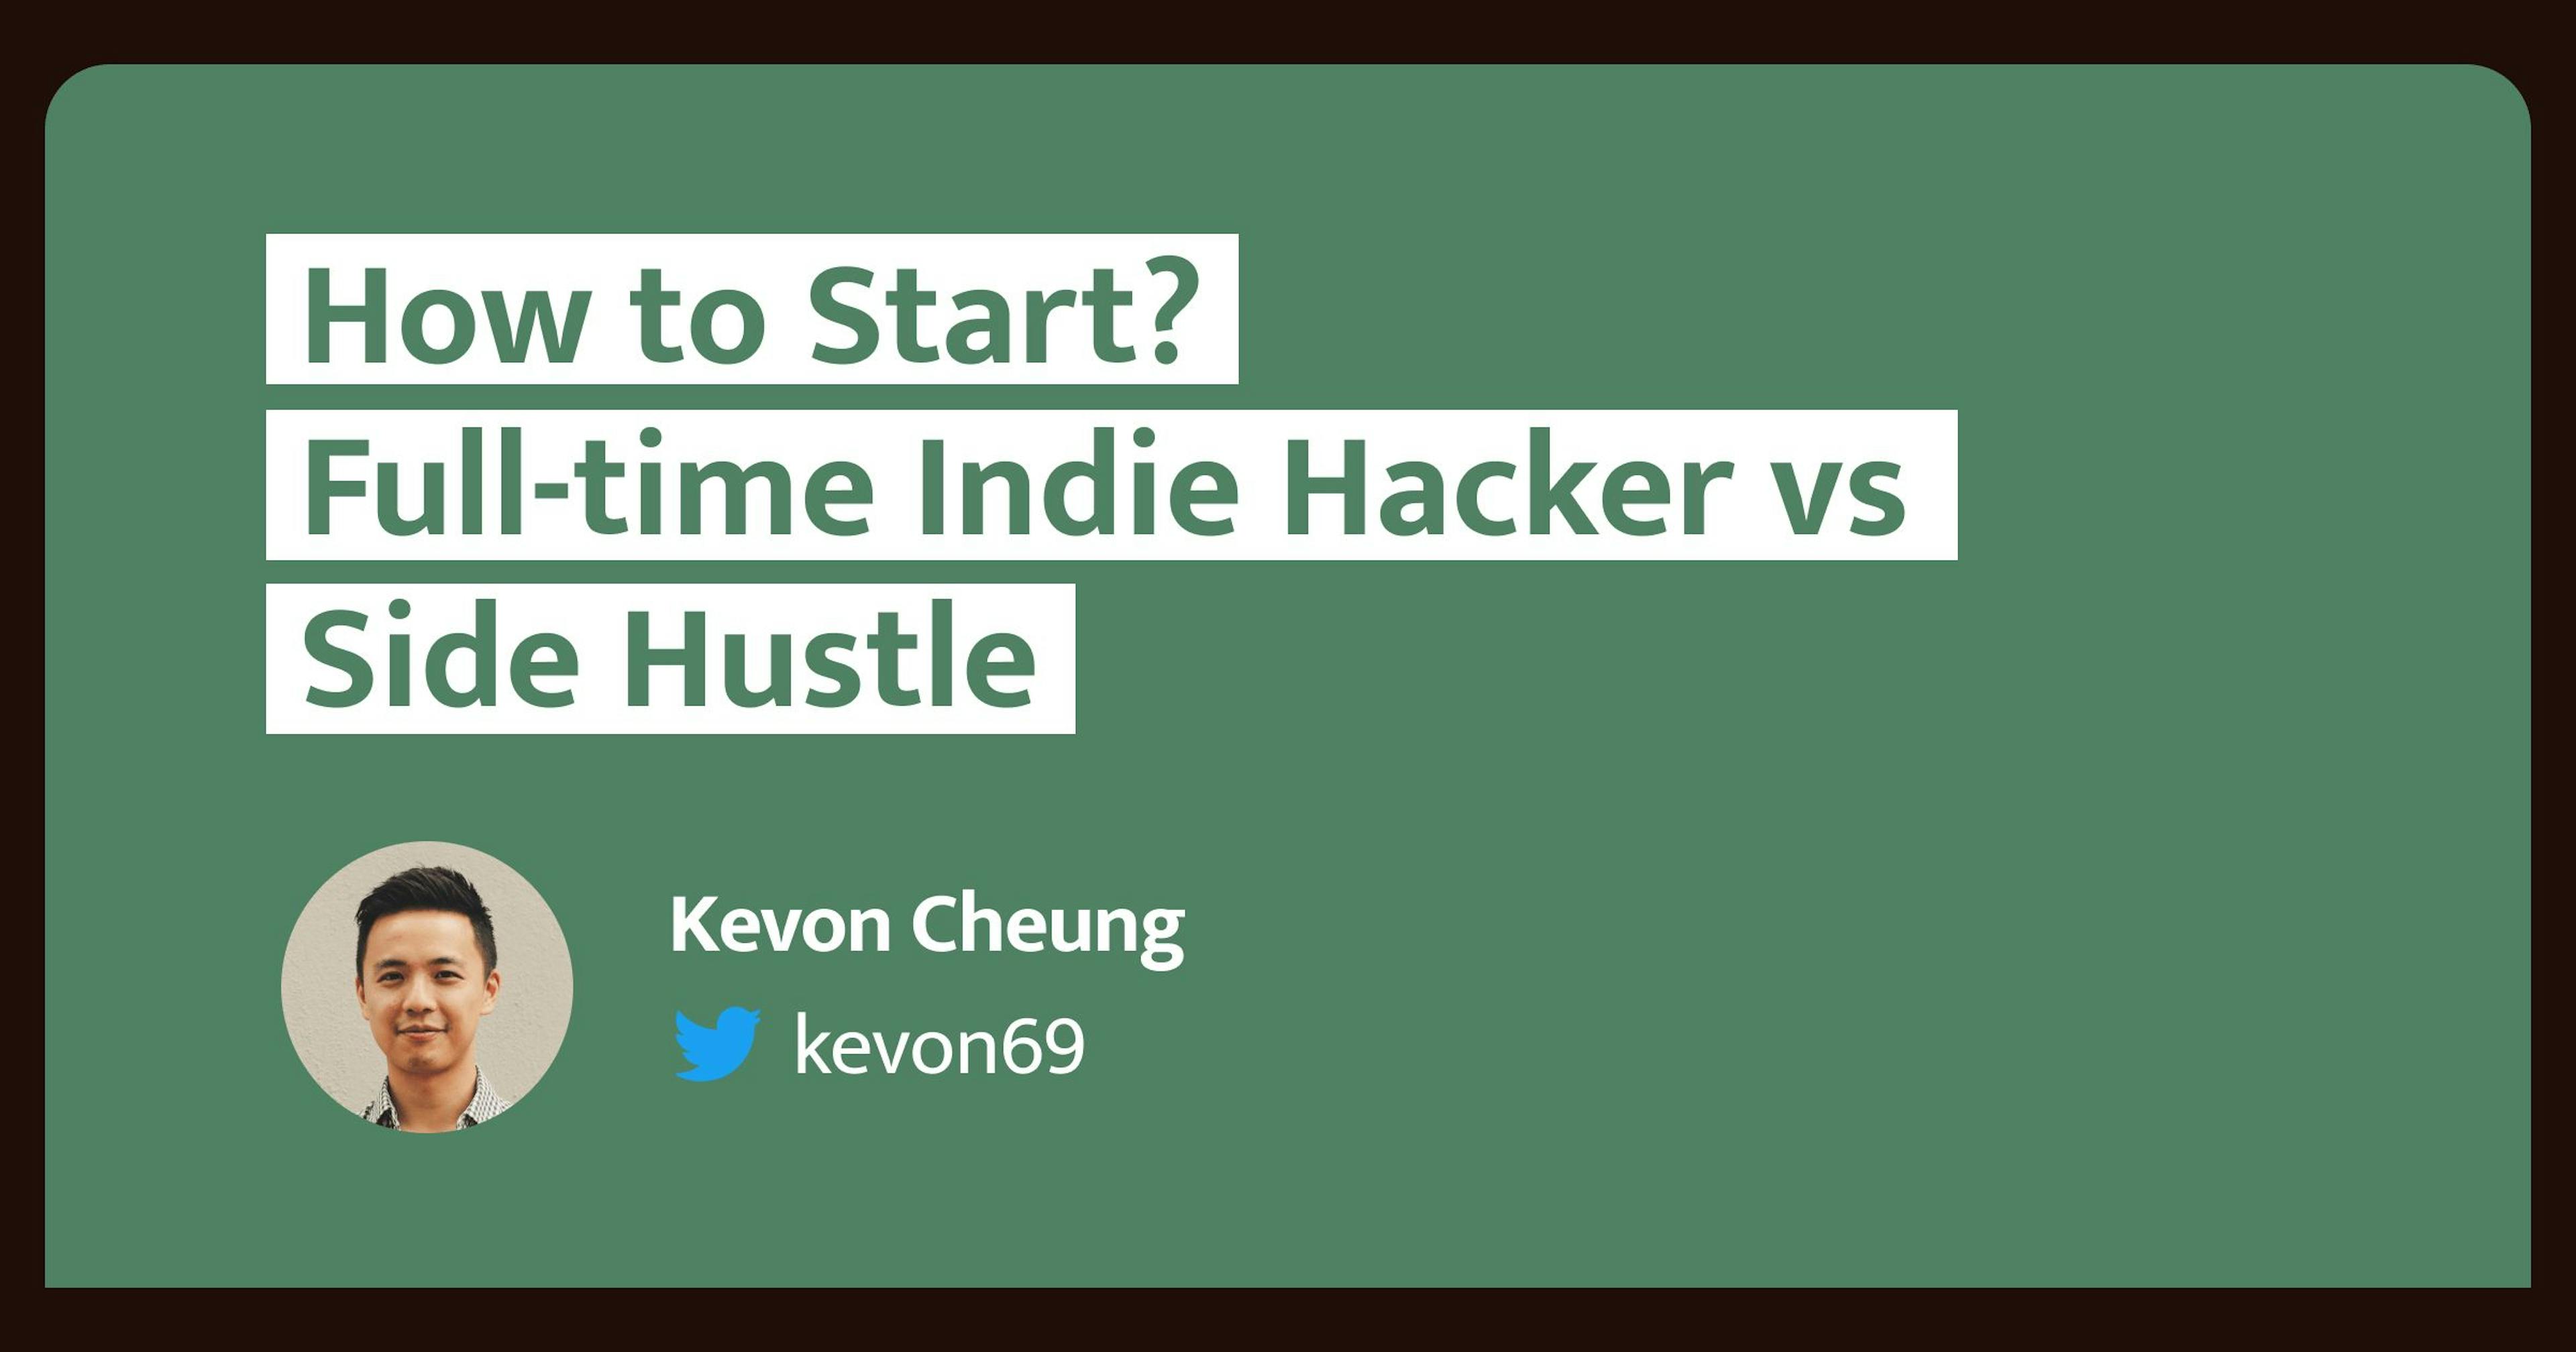 /full-time-indie-hacker-vs-side-hustle-the-different-ways-of-chasing-the-cheddar-hr3h33kq feature image